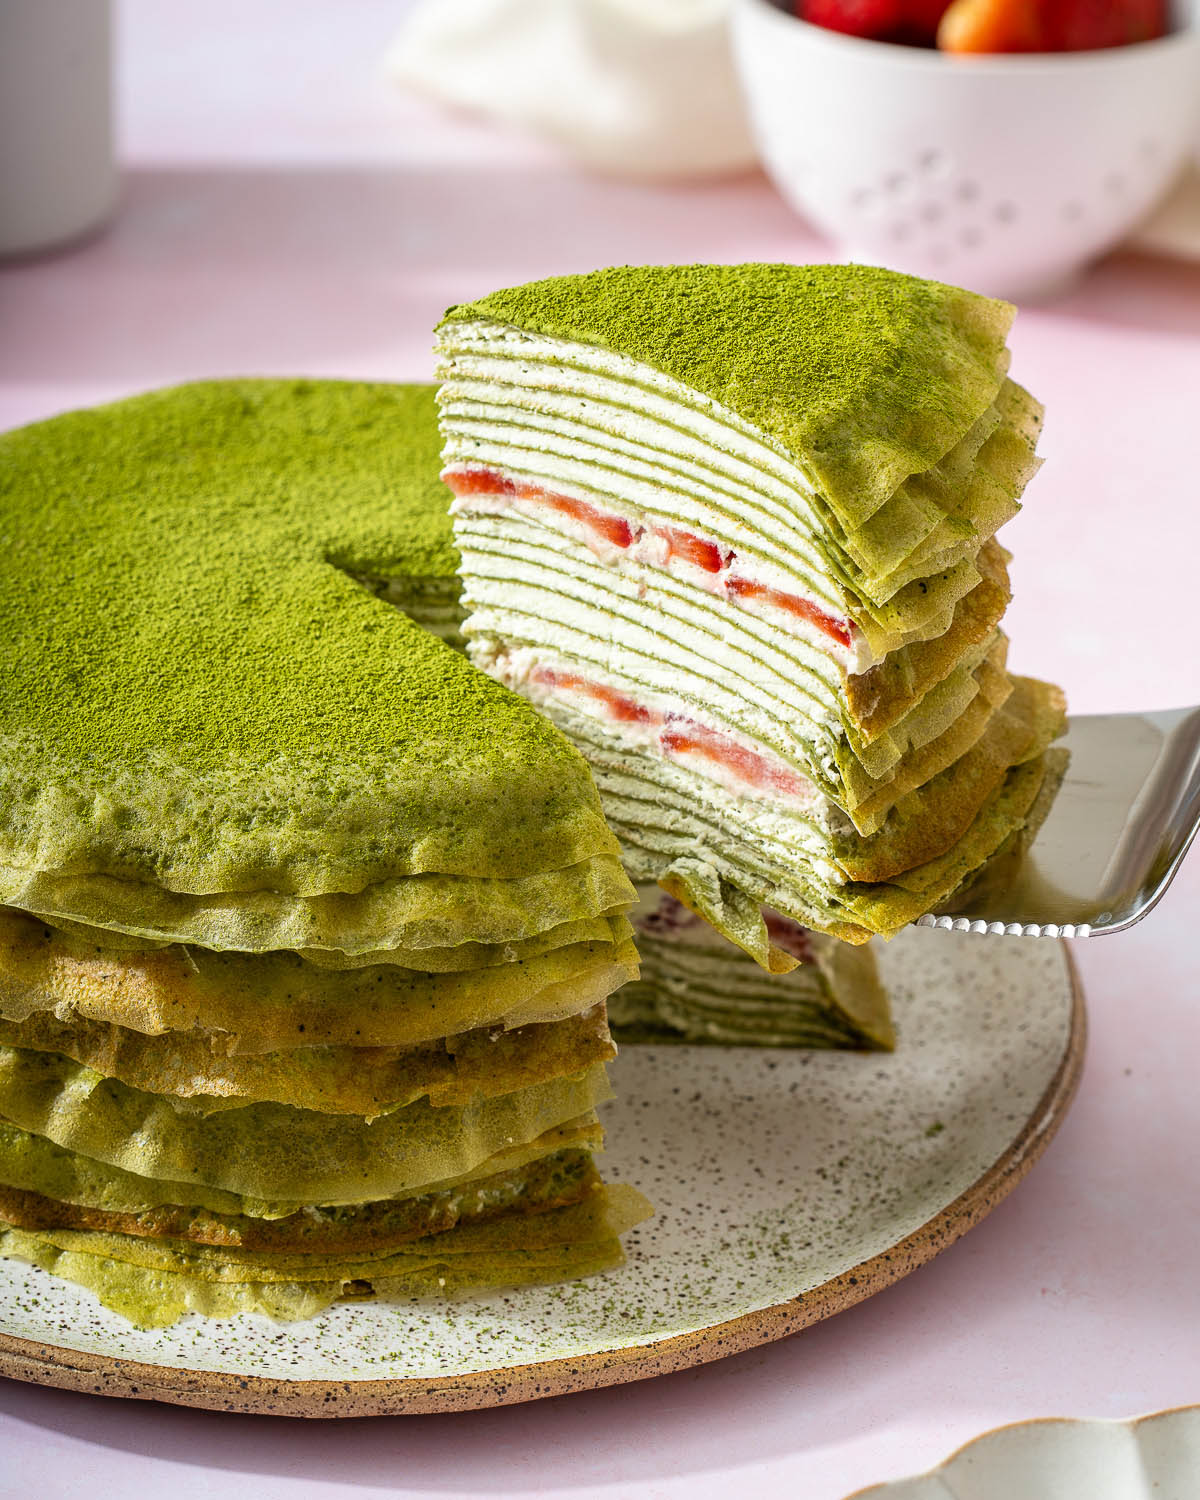 Someone lifting slice of cake from a matcha crepe cake.